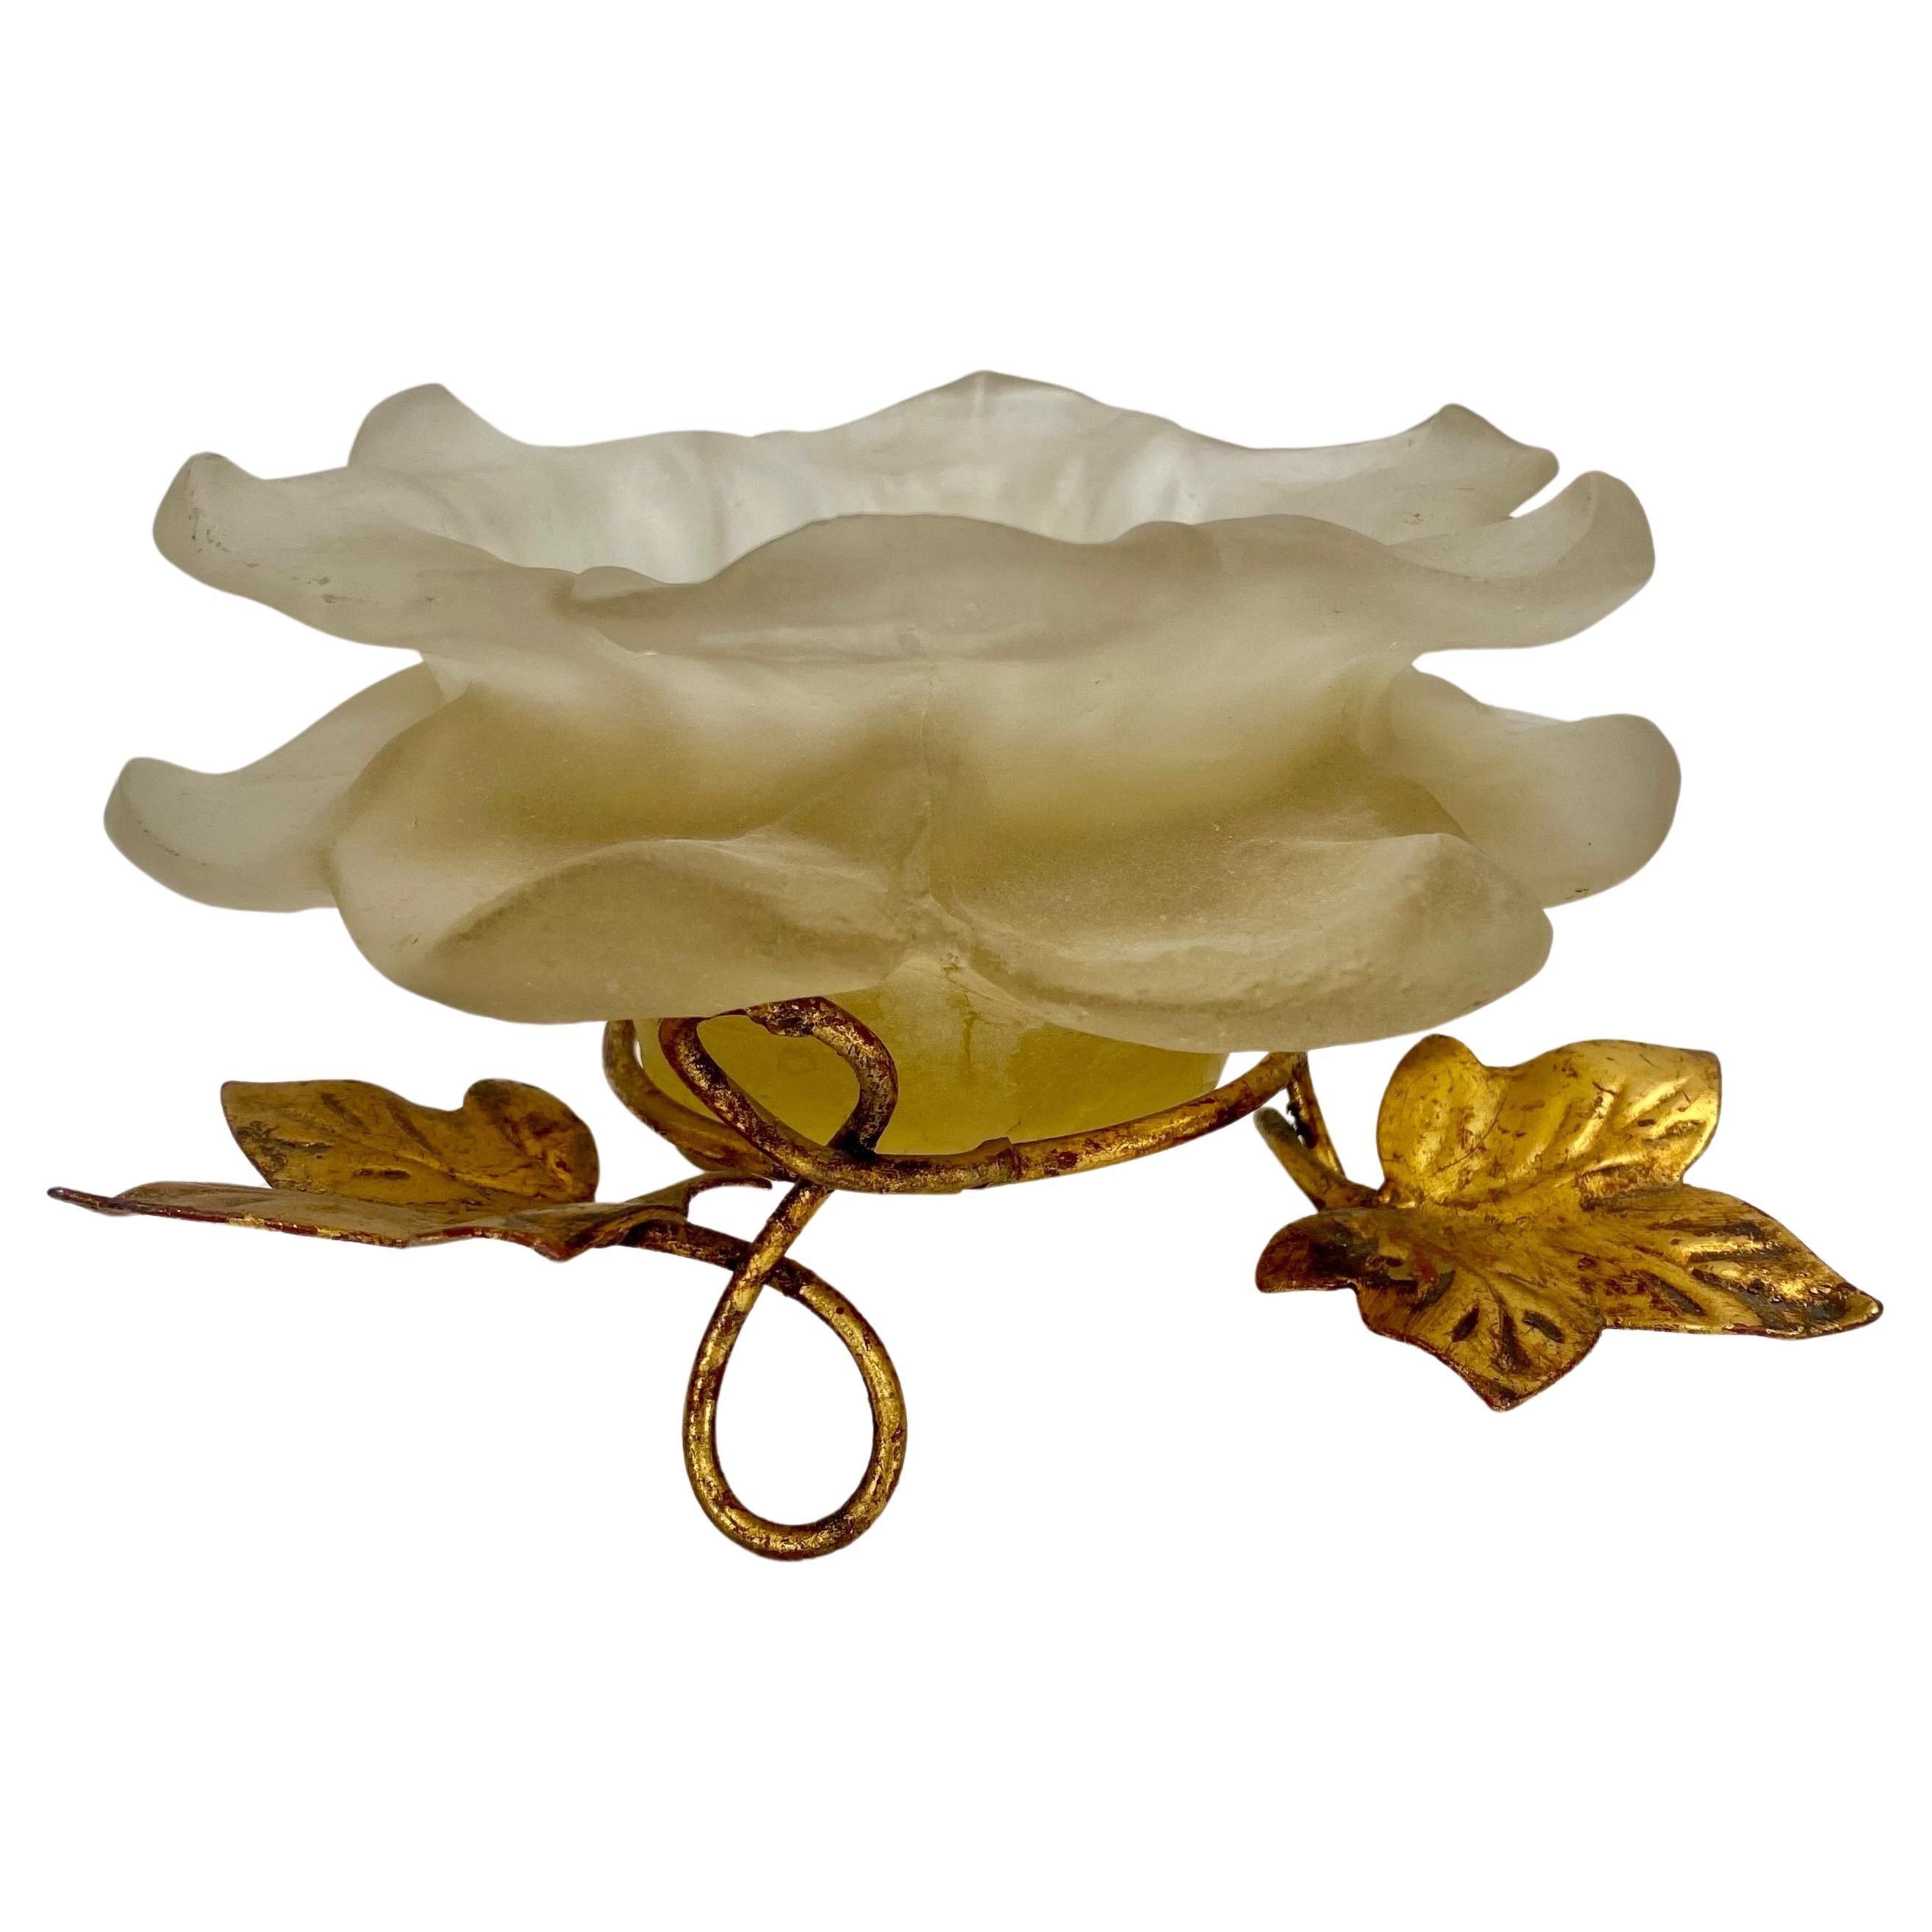 A Mid Century Modern flower shaped candleholder. Made of white frosted lucite, the beautiful flower can holder is raised by a antiqued gold base in the shape of leaves adding charm and elegance to this beautiful home accent piece. 


Dimensions: